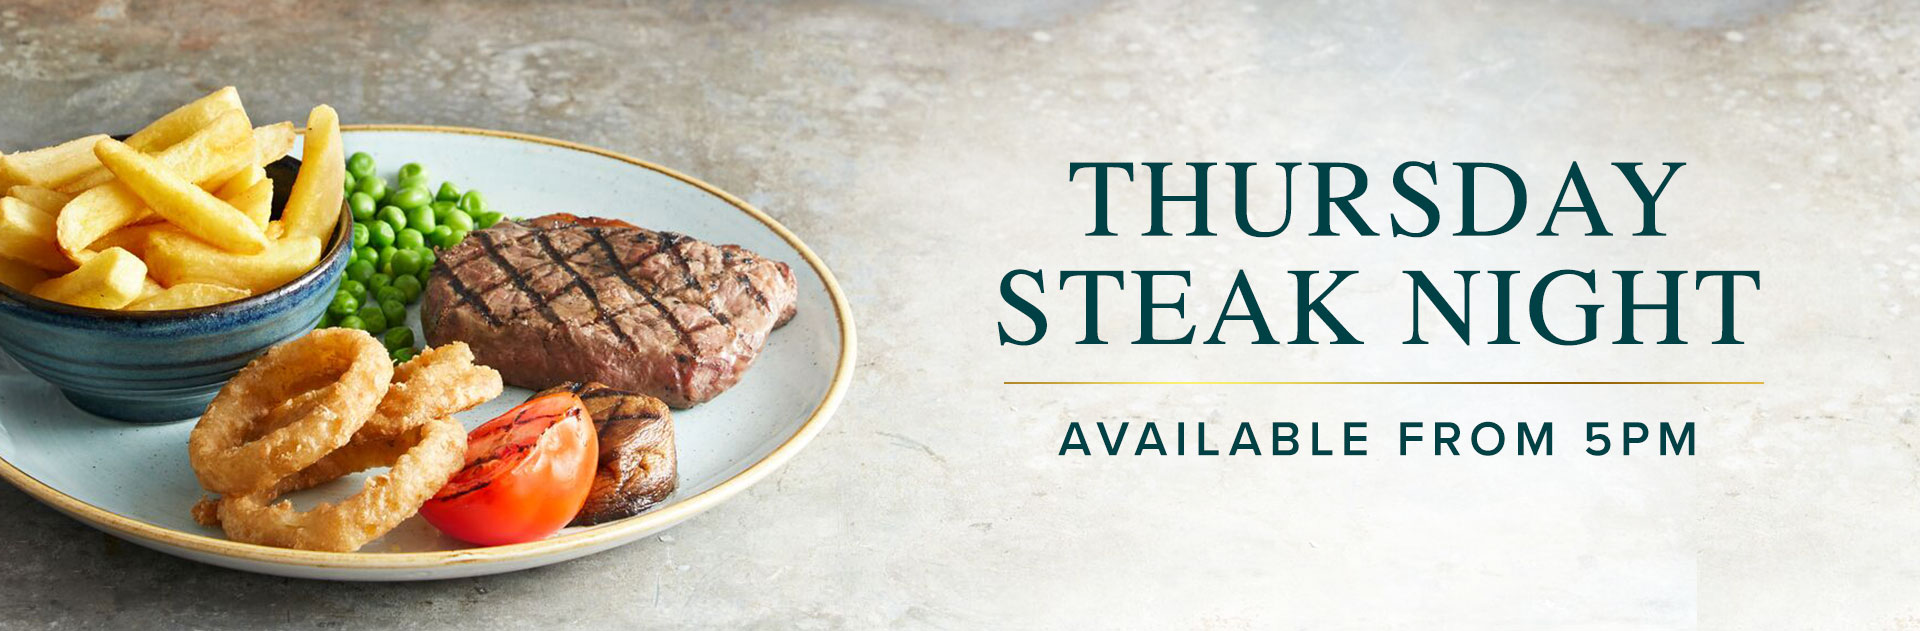 Thursday Steak Night at The Stag and Hounds